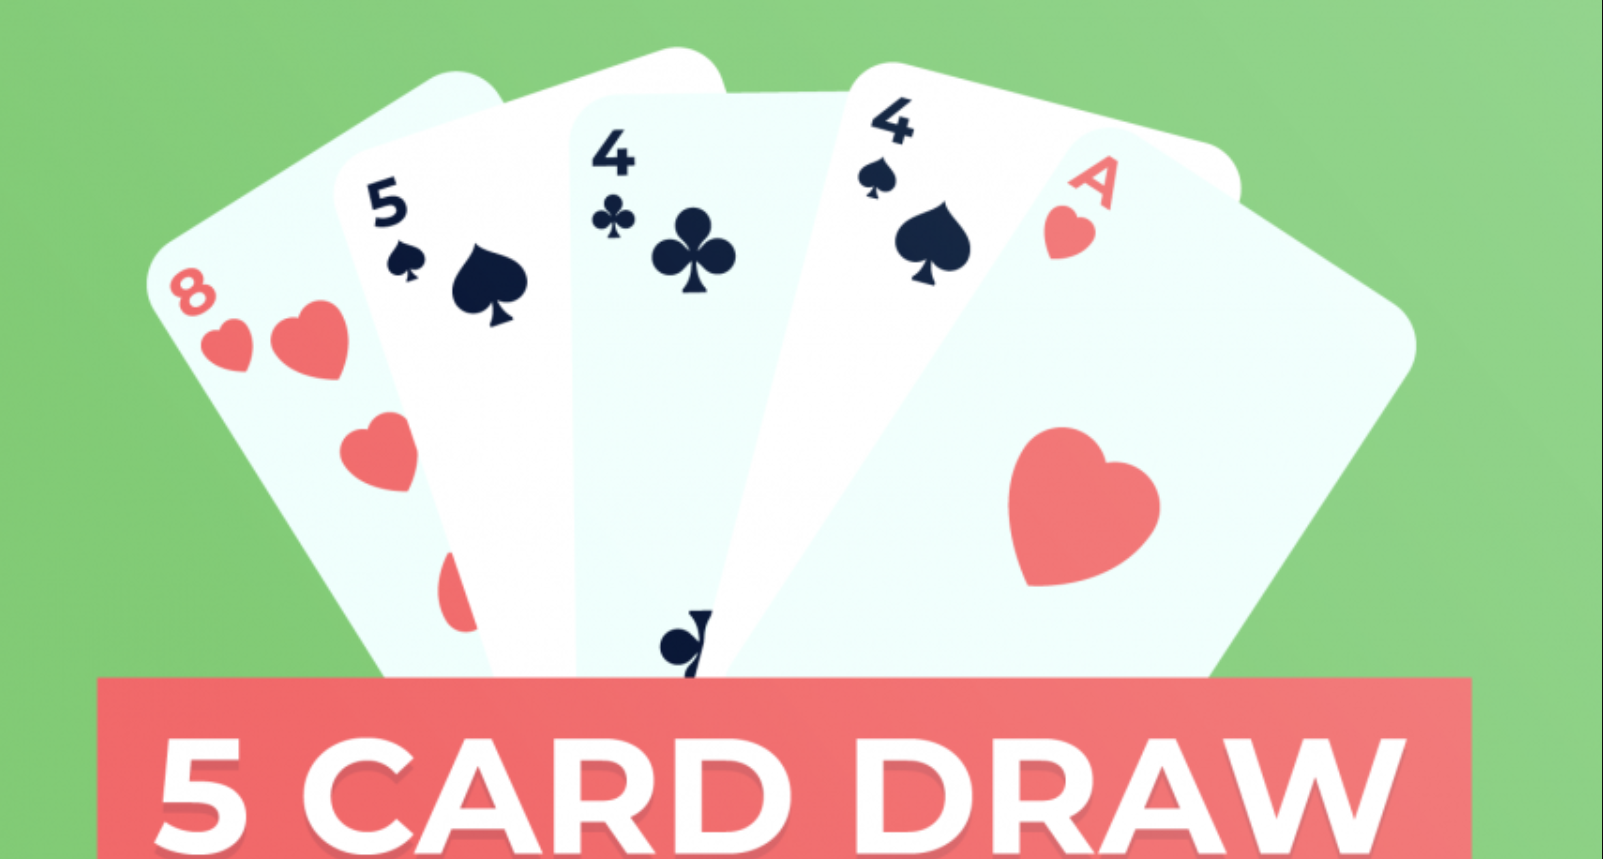 How to play 5 Card Draw